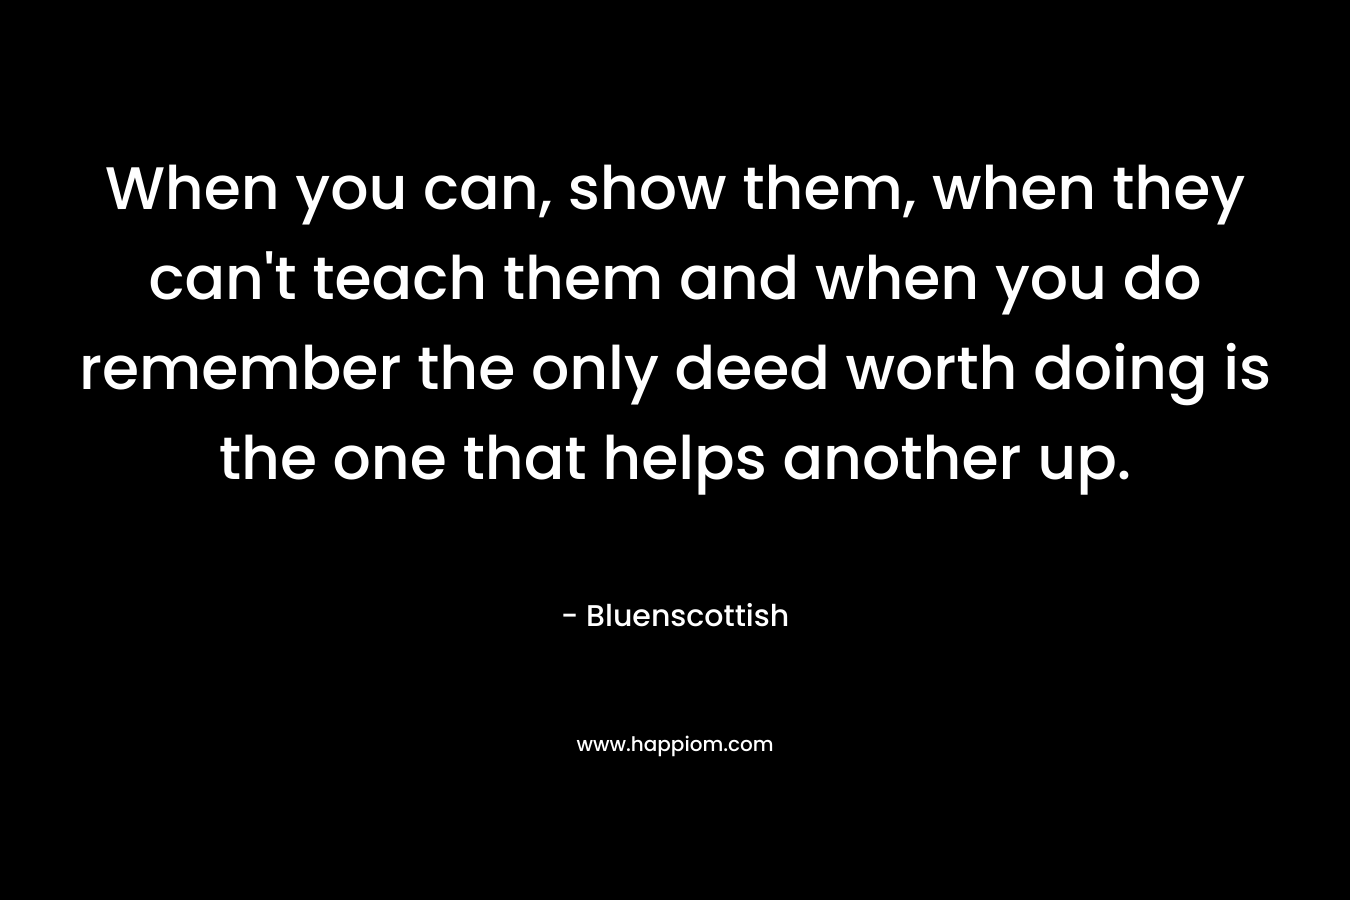 When you can, show them, when they can't teach them and when you do remember the only deed worth doing is the one that helps another up.